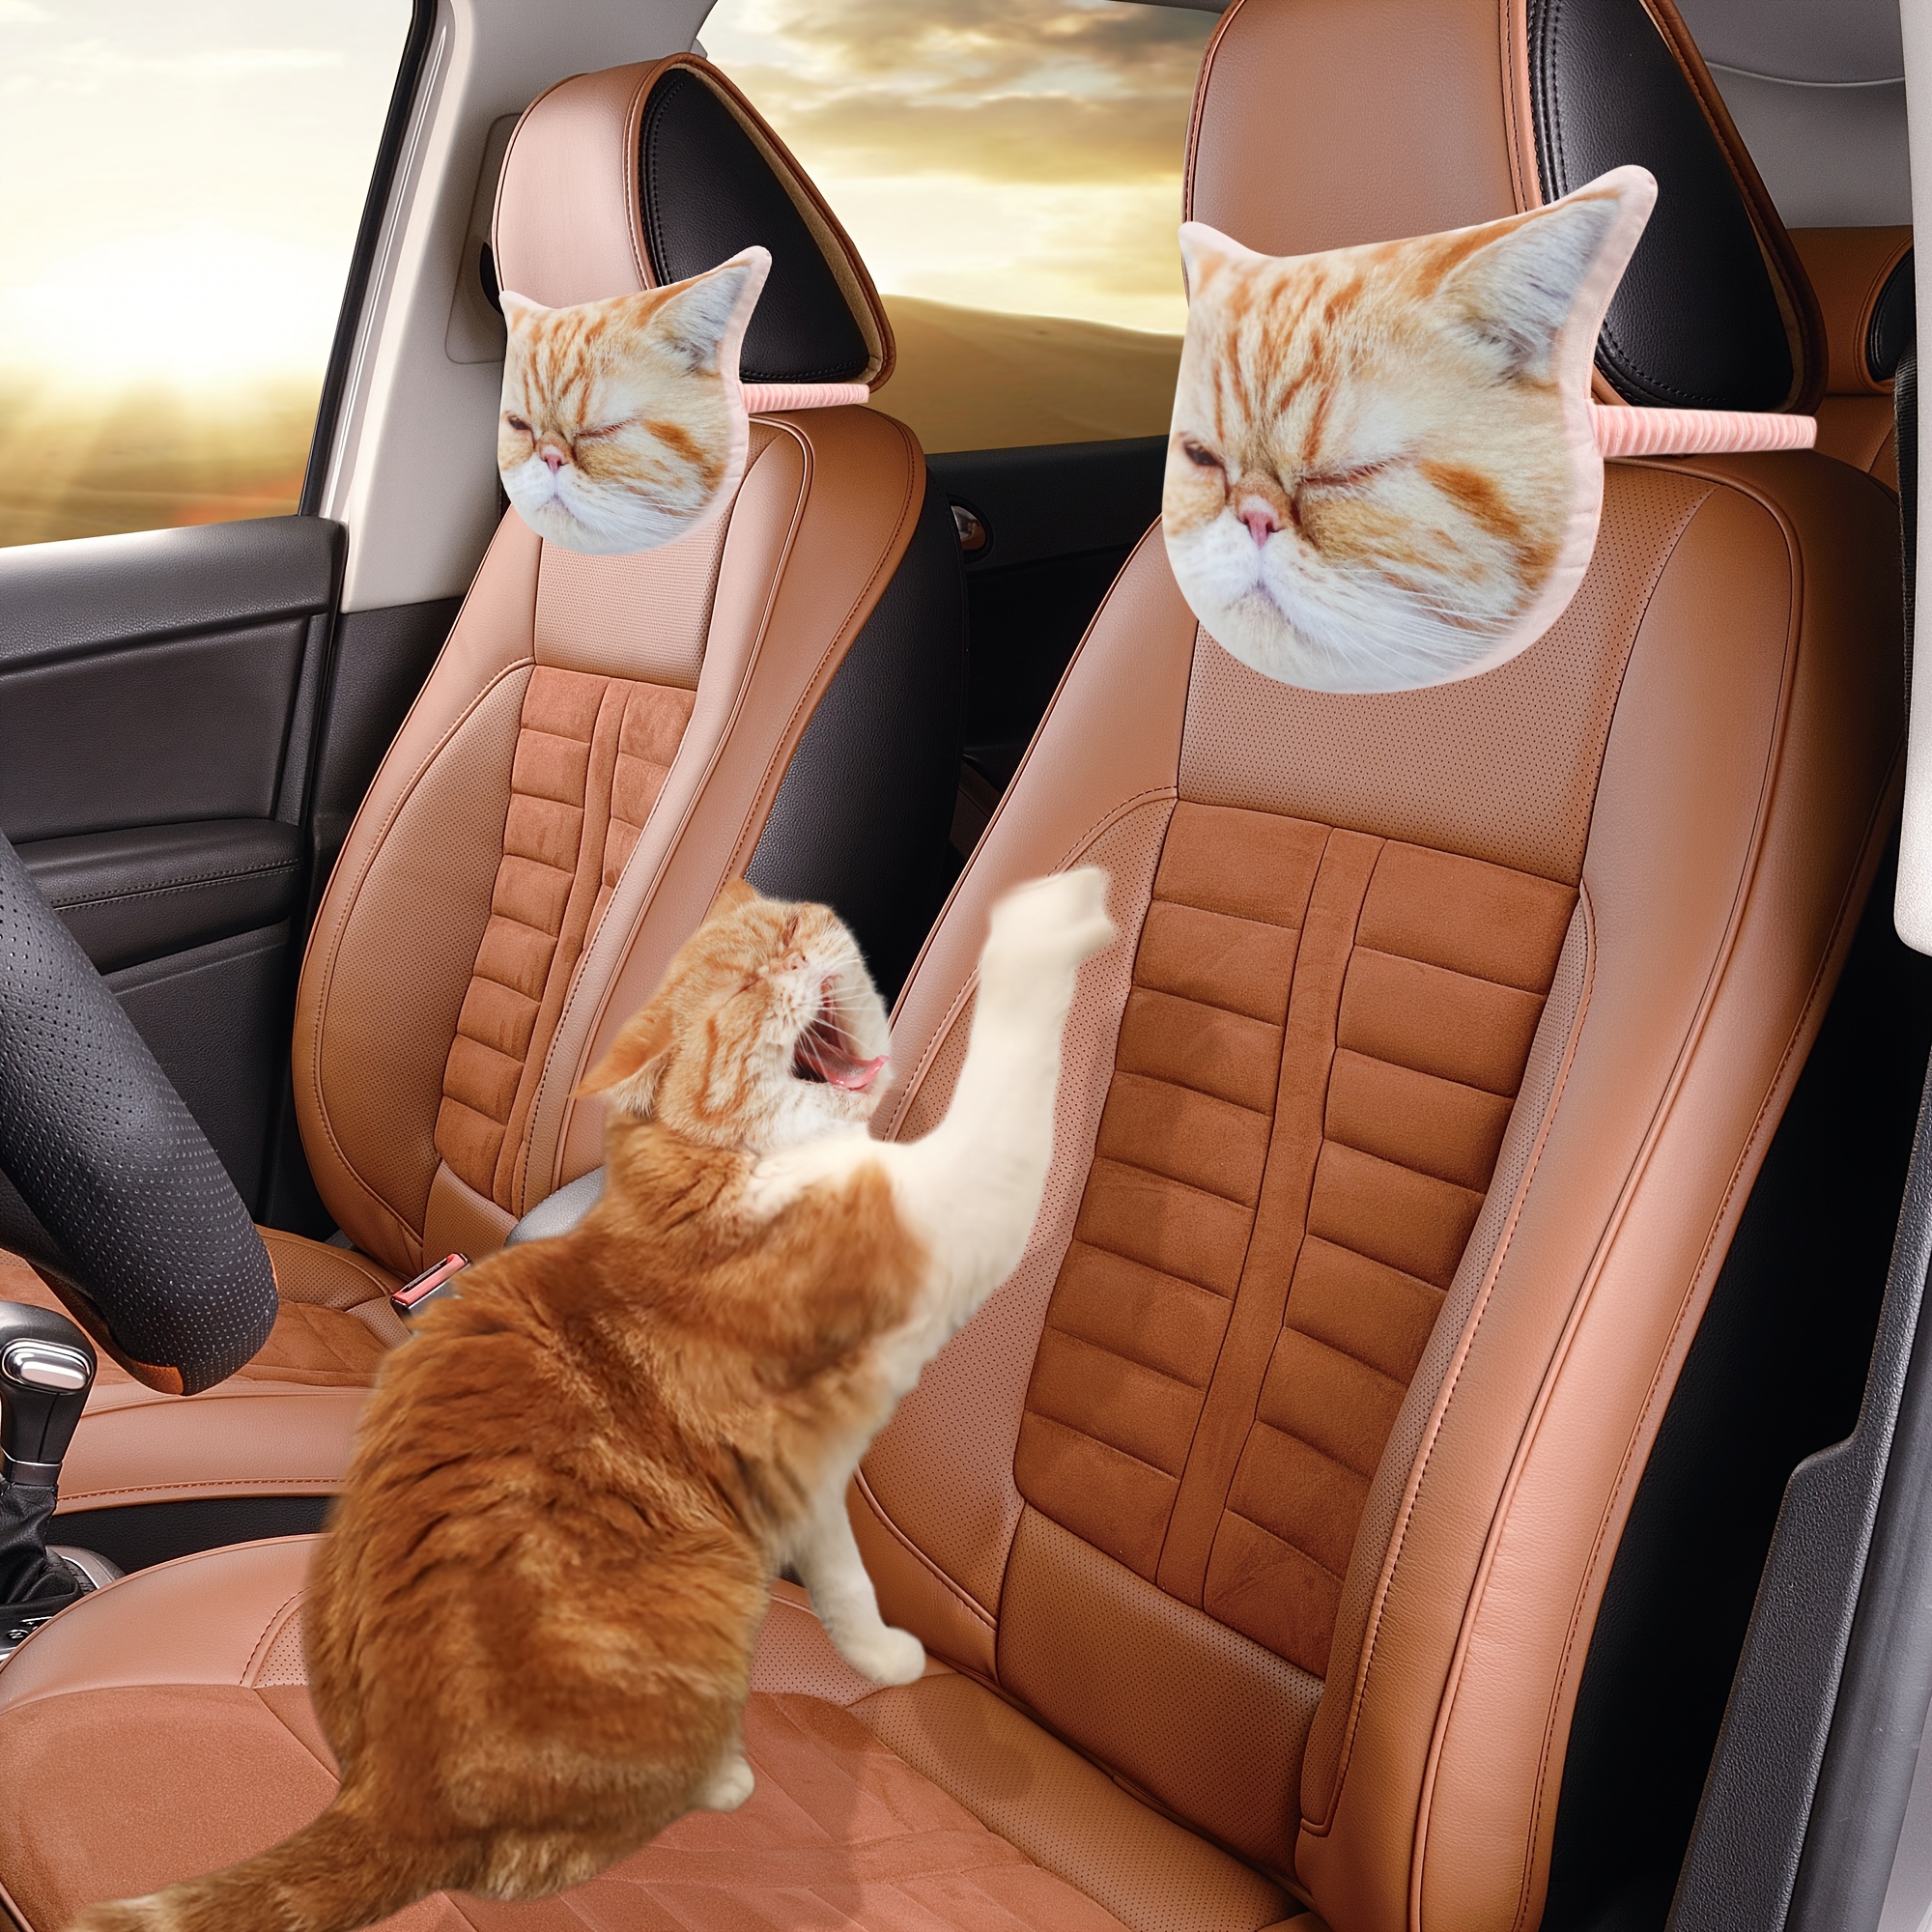 

Customized Personalized Car Pillows Can Be Customized With Dog Head Photos, Cat Head Car Neck Pillows, And Cartoon Portraits.